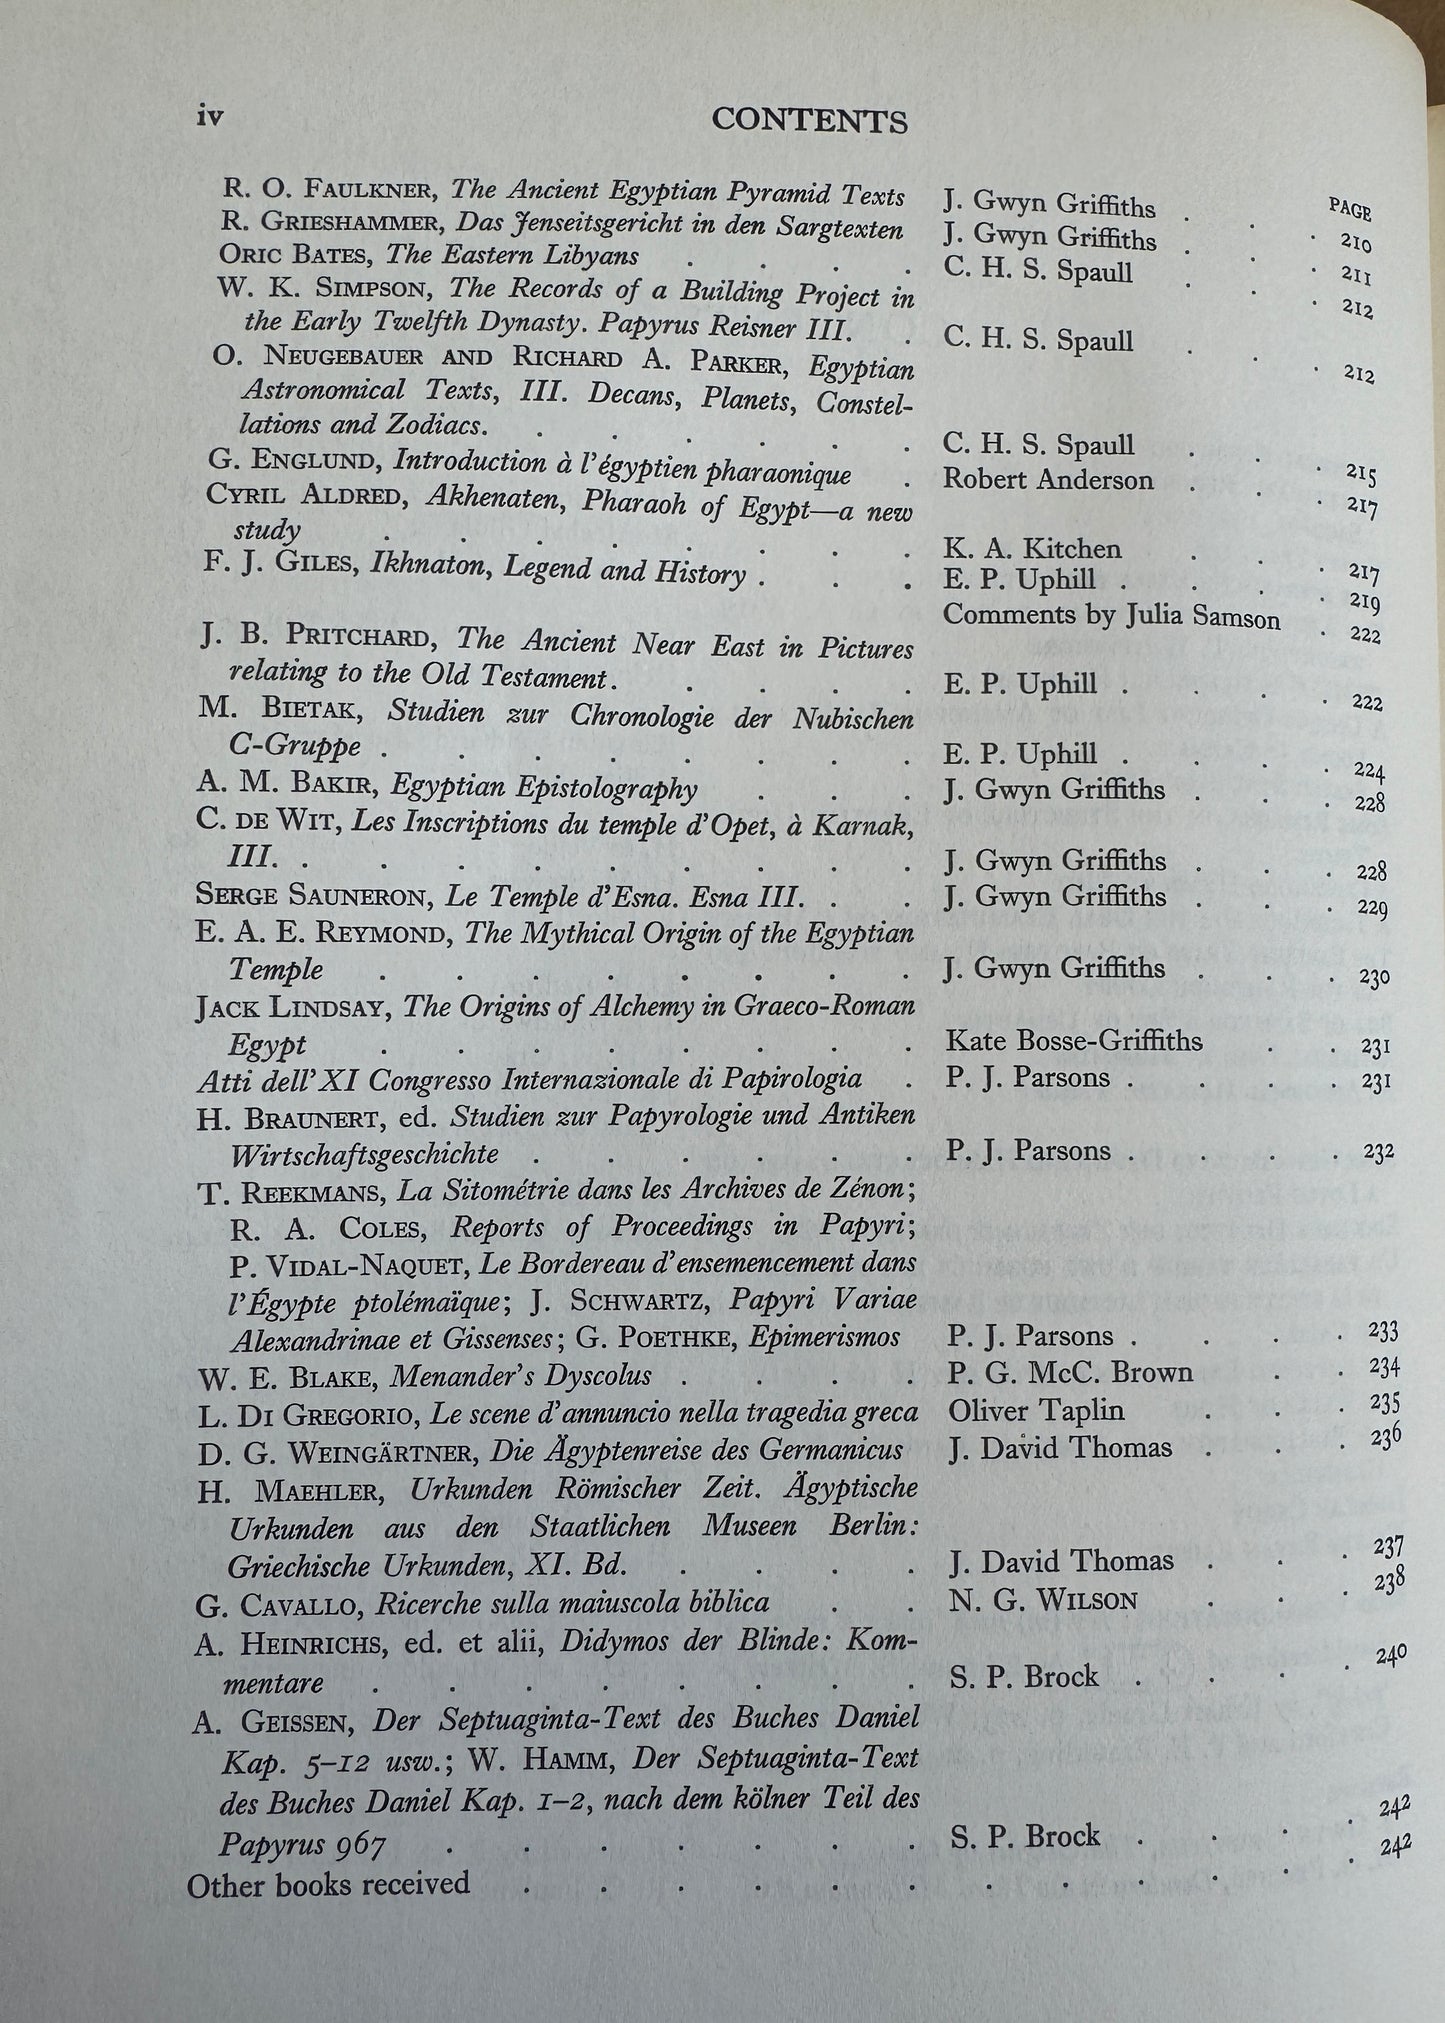 The Journal of Egyptian Archaeology; Vol 57 ; August 1971